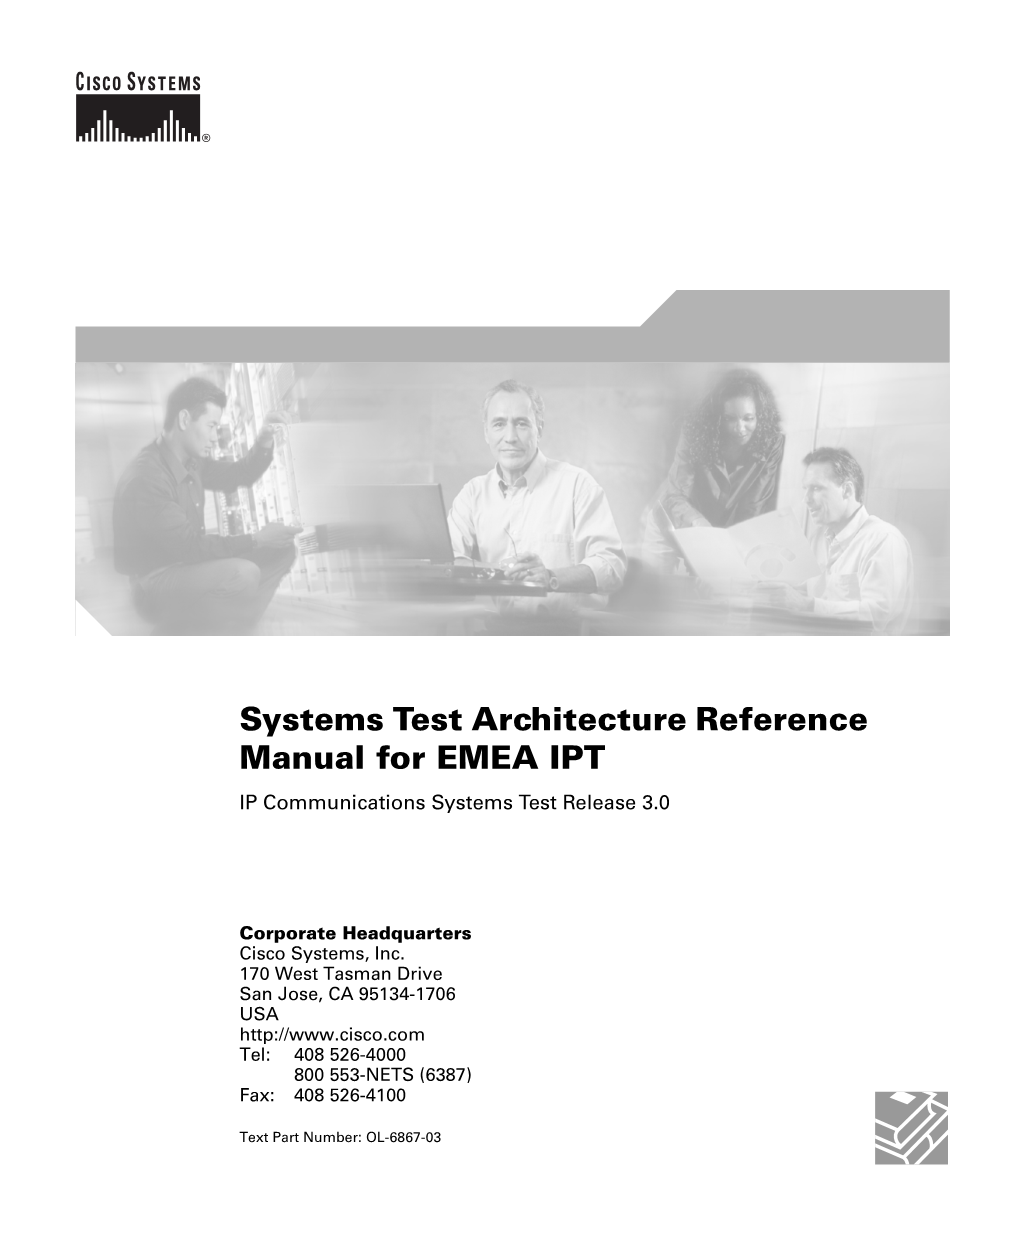 Systems Test Architecture Reference Manual for EMEA IPT IP Communications Systems Test Release 3.0